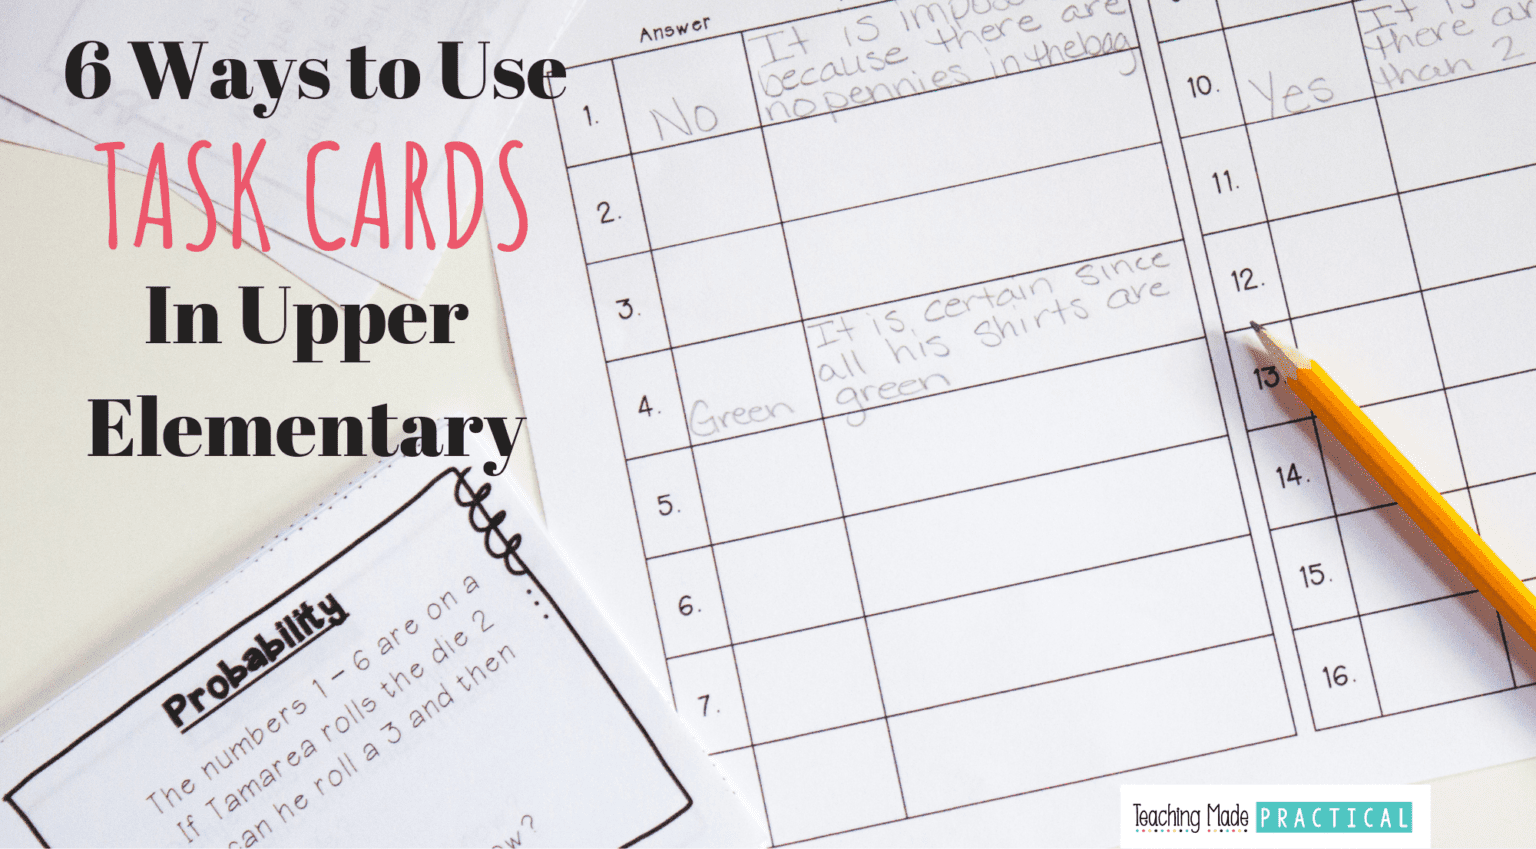 6-ideas-for-using-task-cards-in-3rd-4th-and-5th-grade-classrooms